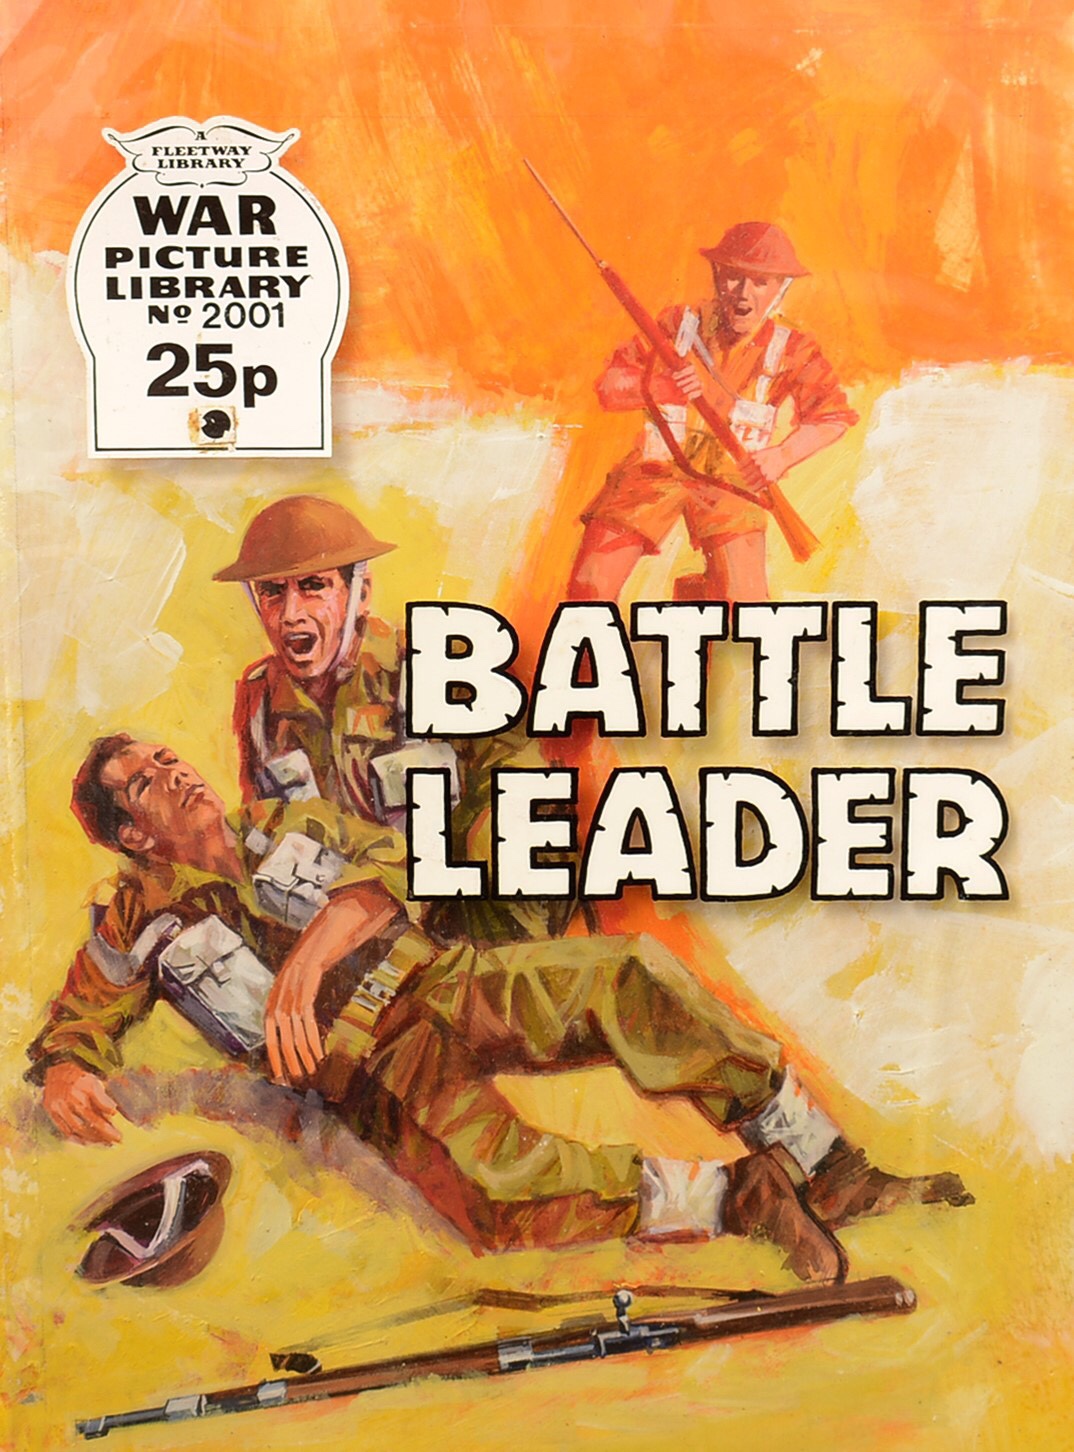 Original Art Work for the front cover of War Picture Library, No. 554 'Battle Leader', by Dave Dimmock, gouache on board, 45 x 34cms, unframed